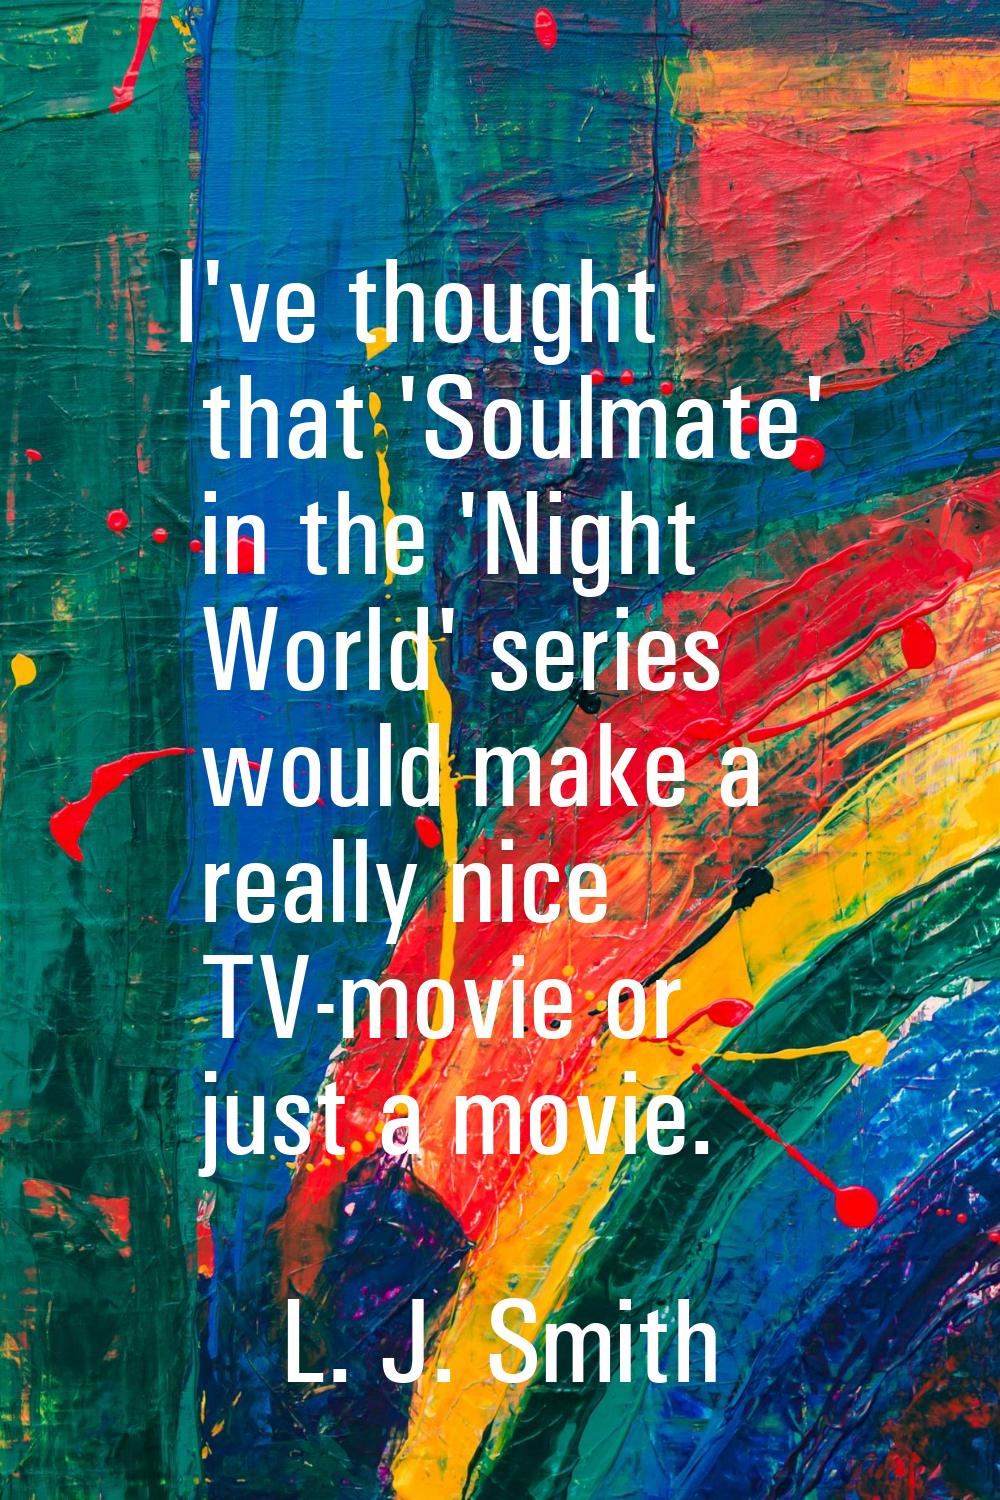 I've thought that 'Soulmate' in the 'Night World' series would make a really nice TV-movie or just 